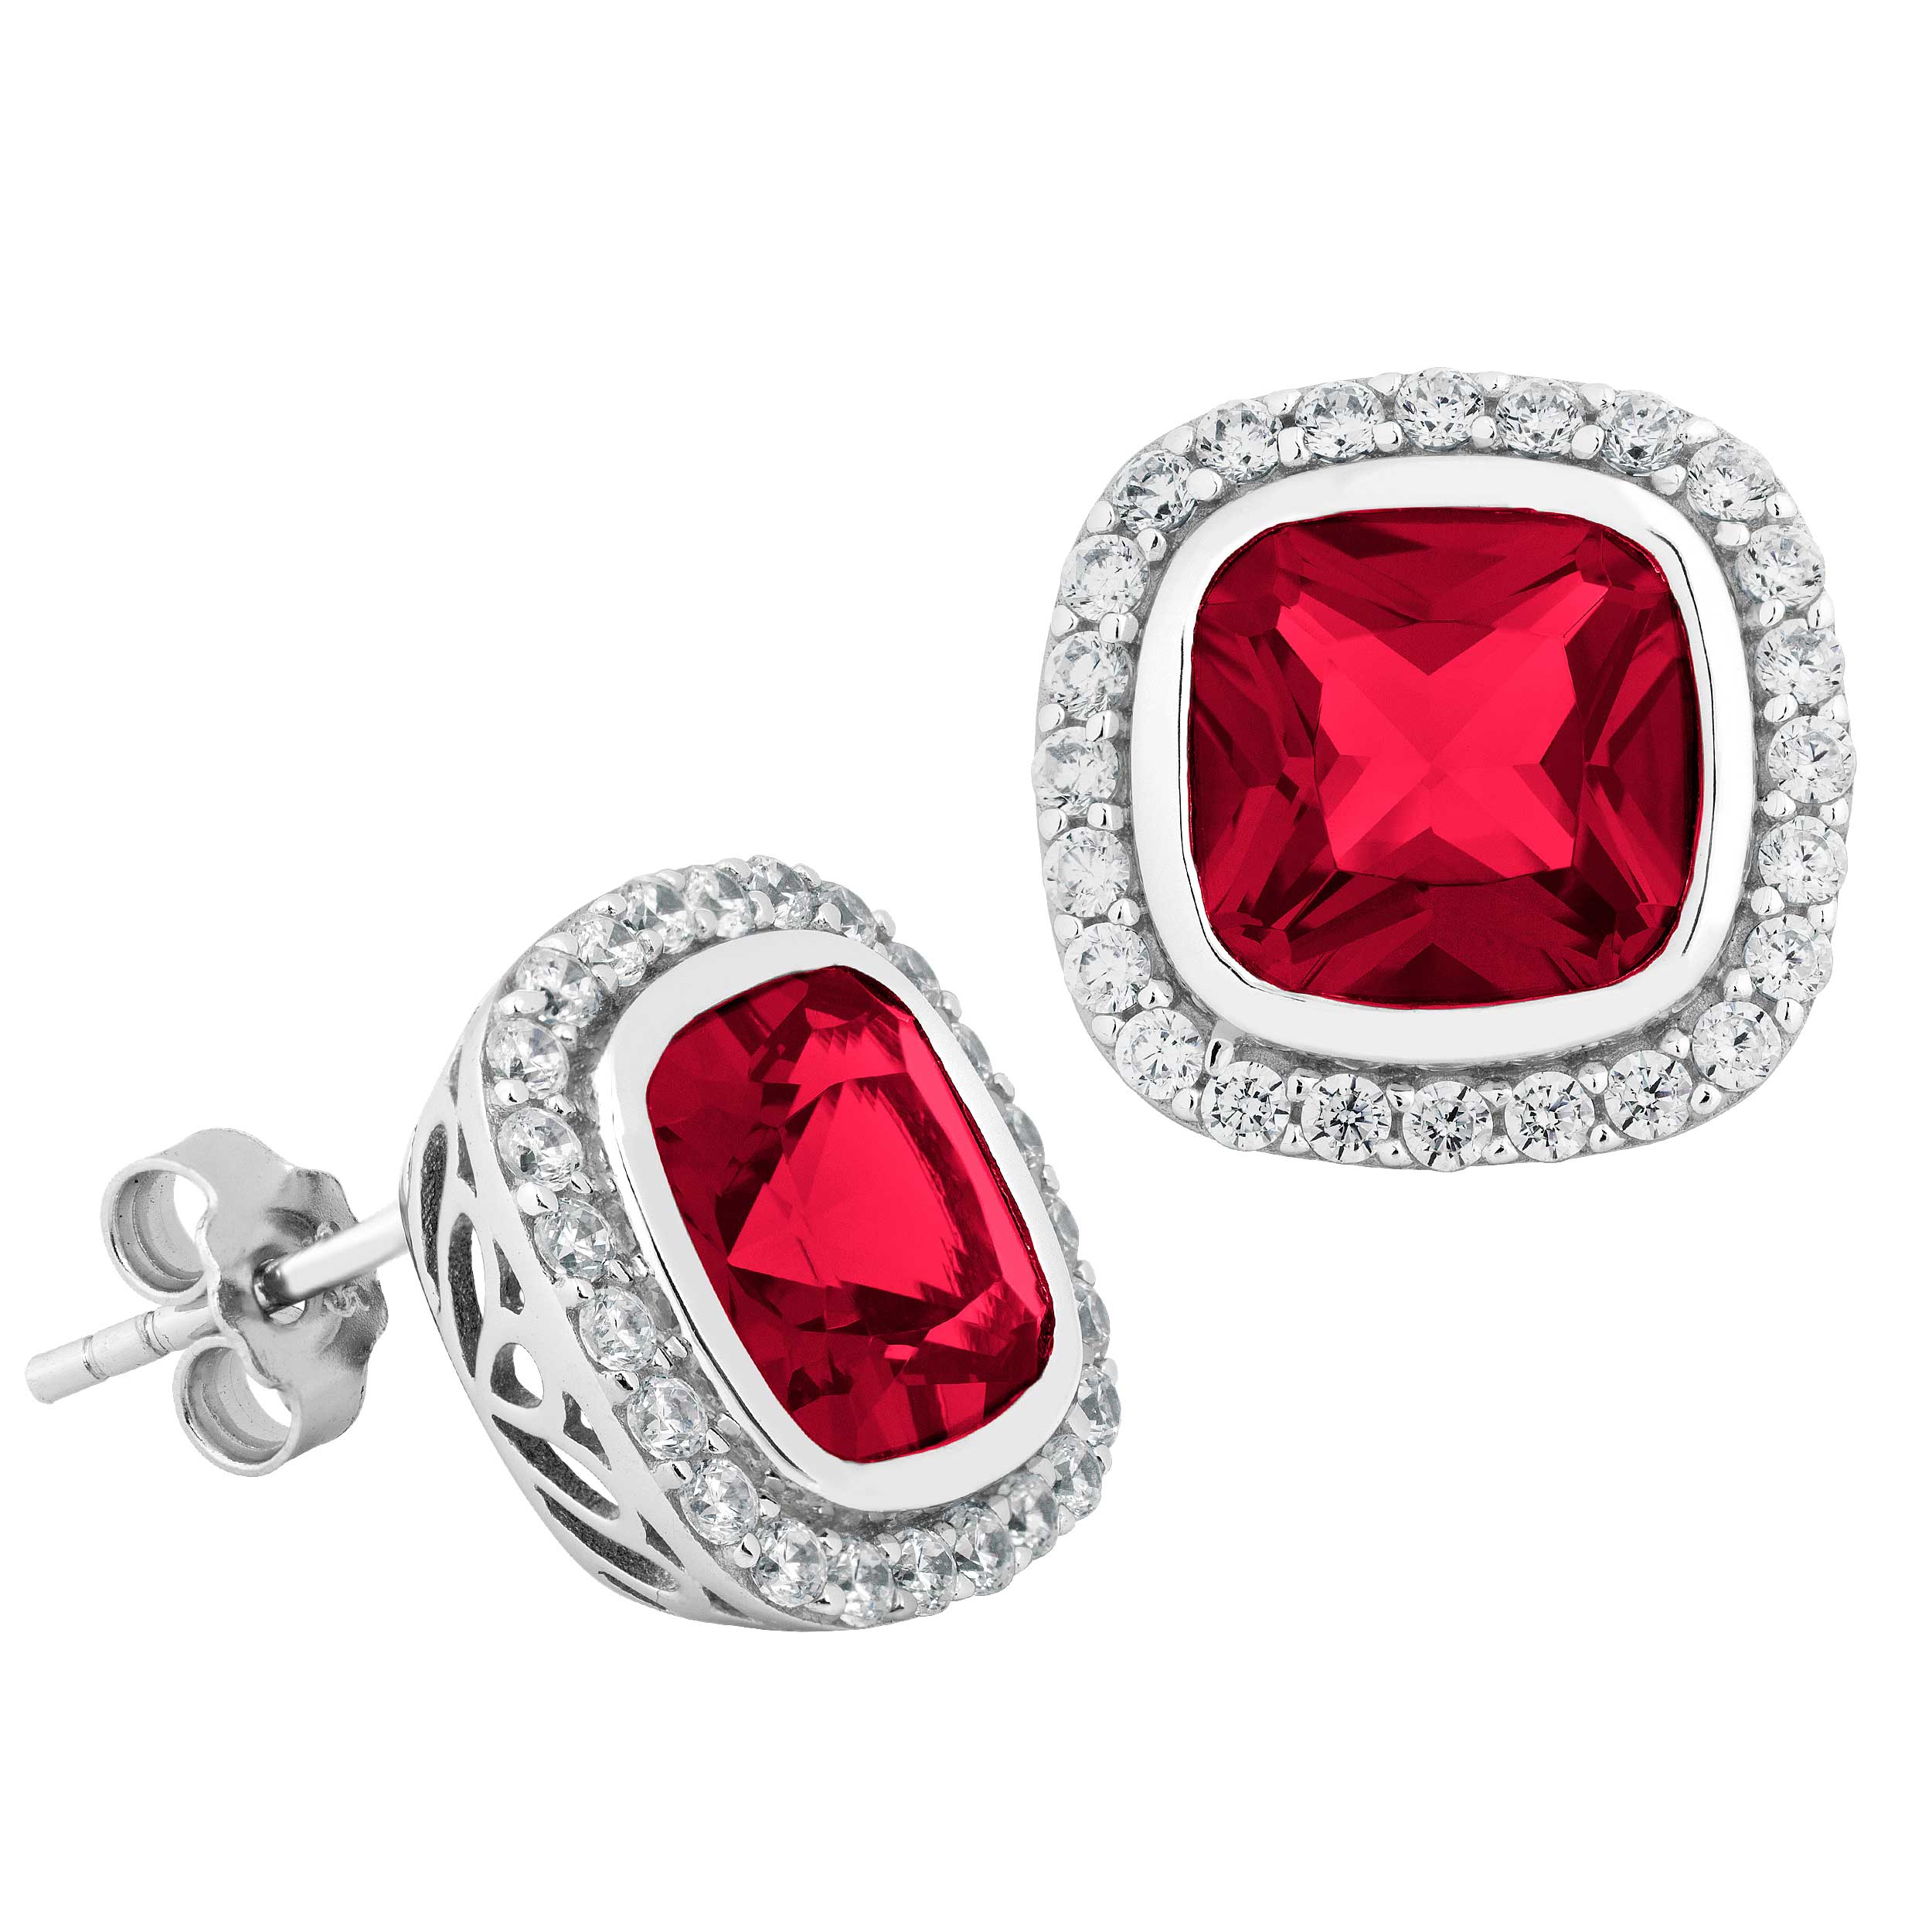 Inlaid Cushion-Cut Created Ruby and White Topaz Stud Earrings, Rhodium Plated Sterling Silver